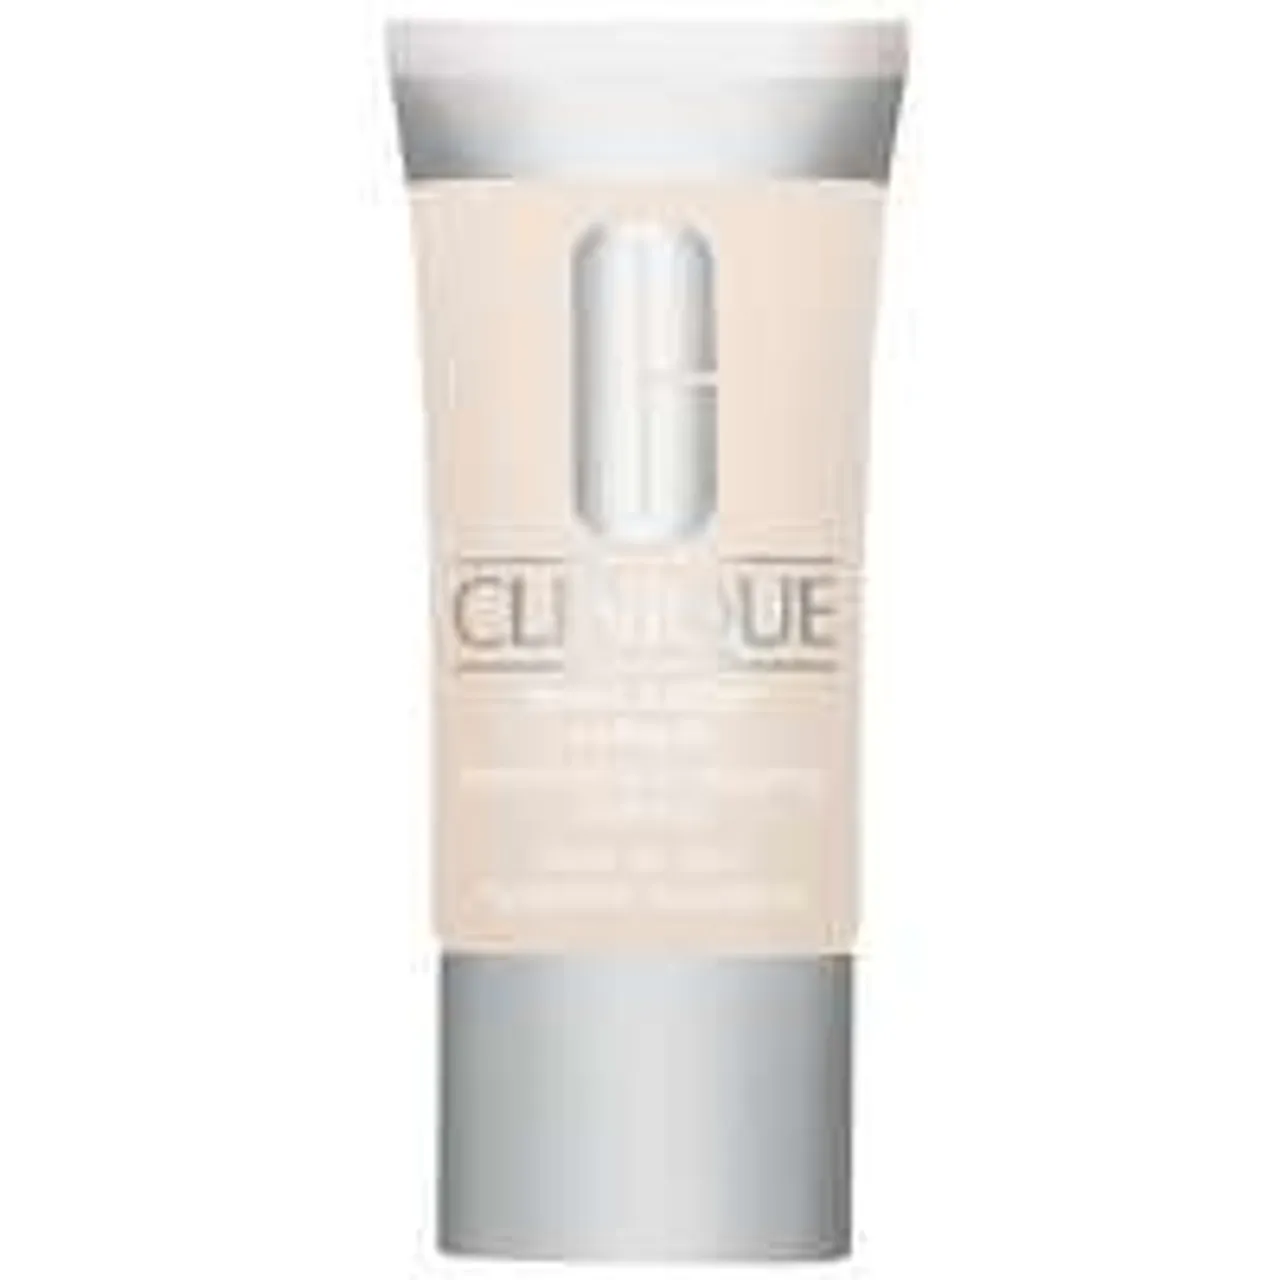 Clinique Even Better Refresh Hydrating and Repair Foundation WN 01 Flax 30ml